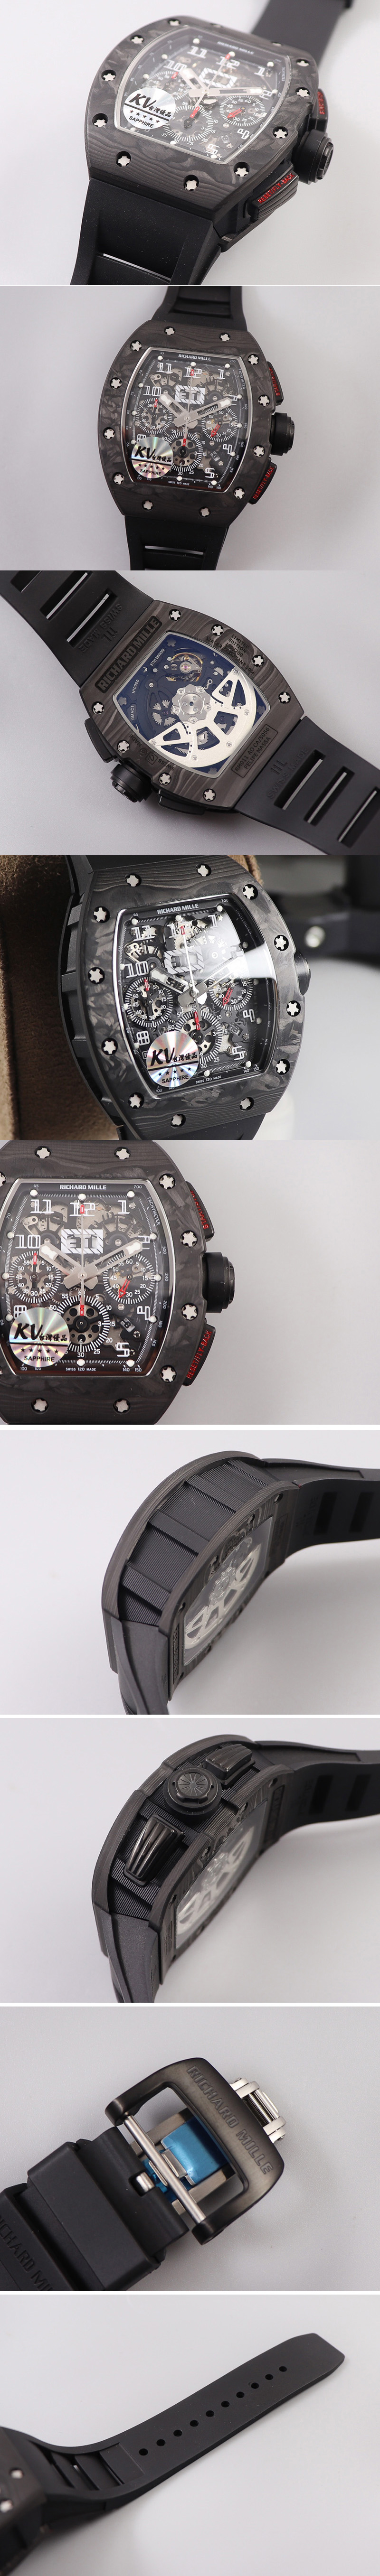 Replica Richard Mille RM011 NTPT Chrono PVD Case KVF 1:1 Best Edition Crystal Dial Black on Black Rubber Strap A7750